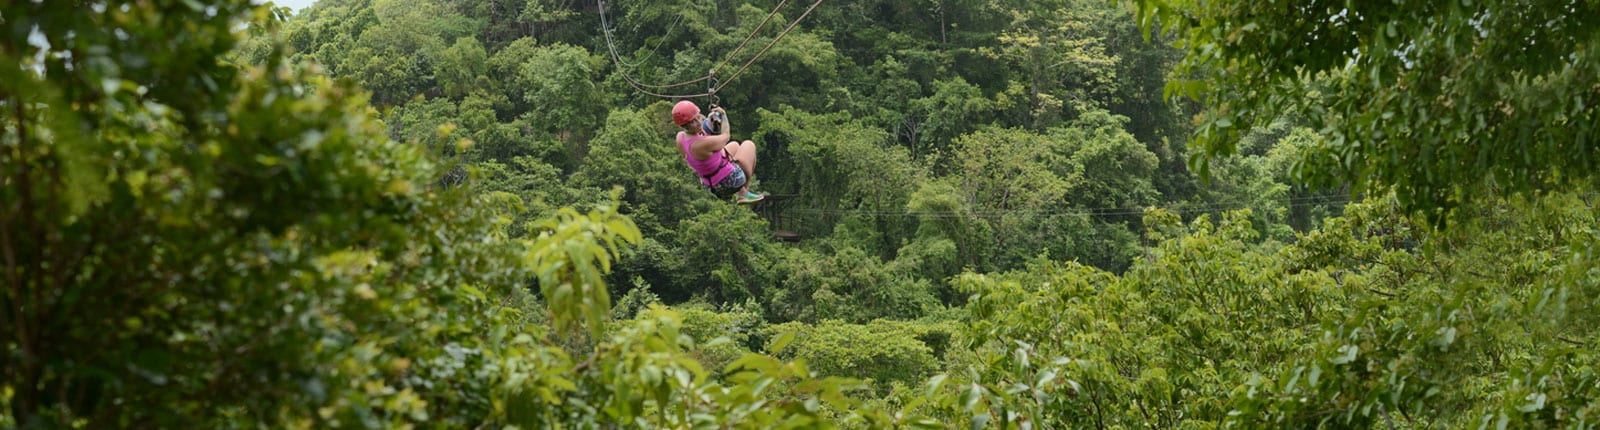 Ziplining through the forest canopy in Limon, Costa Rica